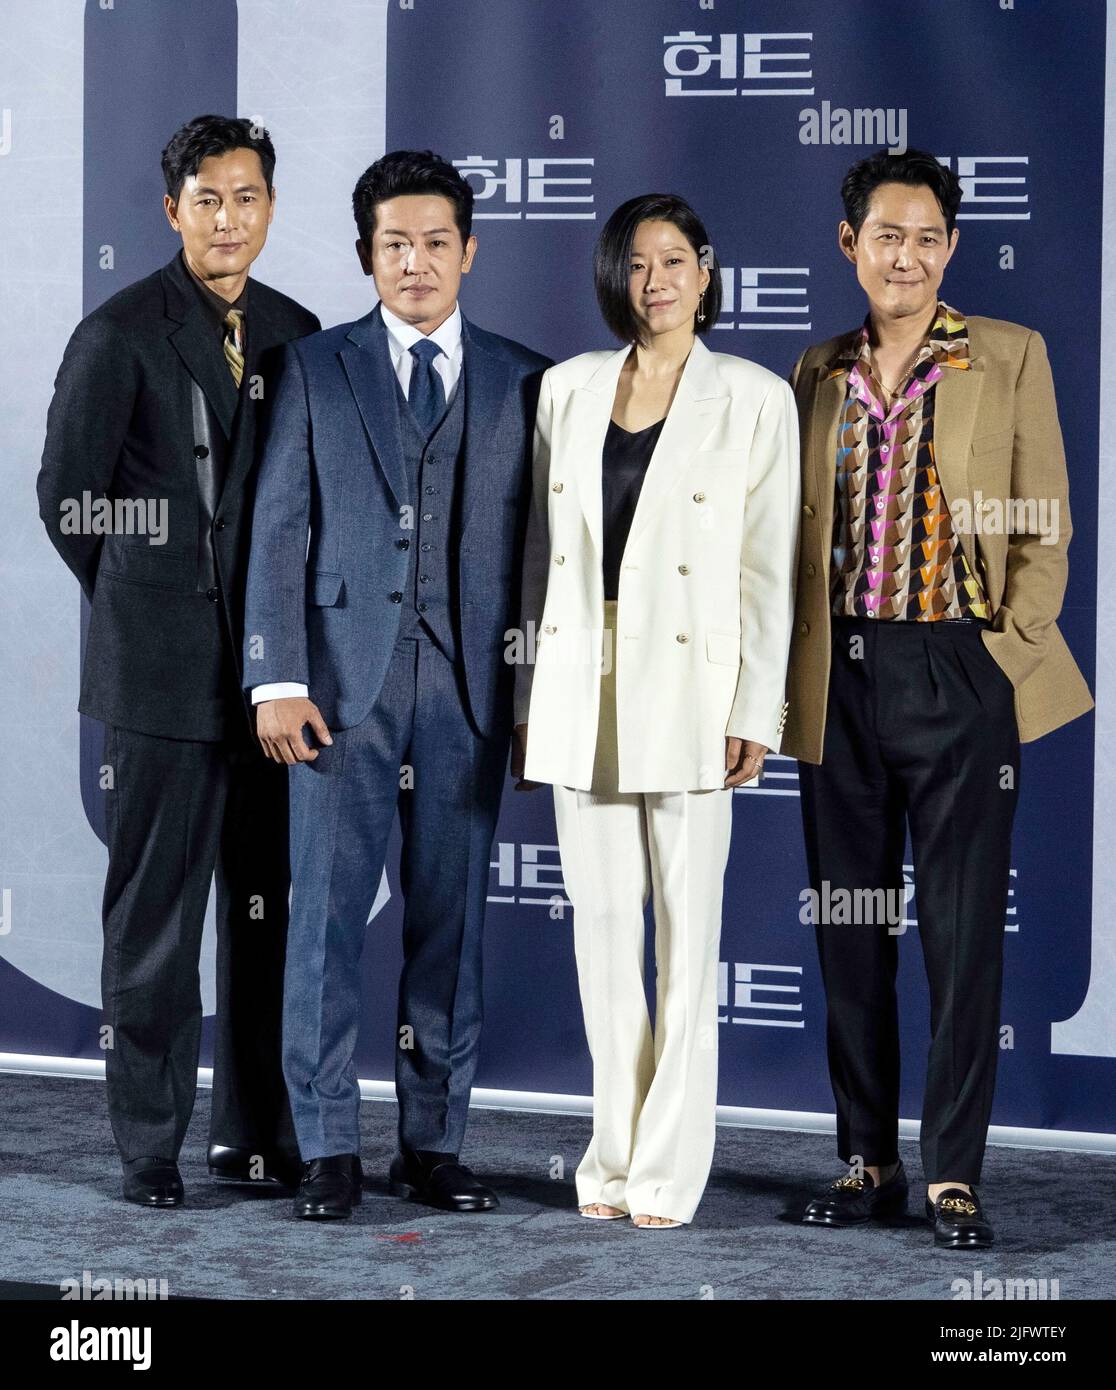 Seoul, South Korea. 5th July, 2022. (L to R) South Korean actors Jung Woo-sung, Heo Sung-tae, actress Jeon Hye-jin, actor and director Lee Jung-jae, pose for photos during a press conference to promote their latest movie 'Hunt' in Seoul, South Korea on July 5, 2022. The movie is to be released in the country on Aug 10. (Photo by: Lee Young-ho/Sipa USA) Credit: Sipa USA/Alamy Live News Stock Photo